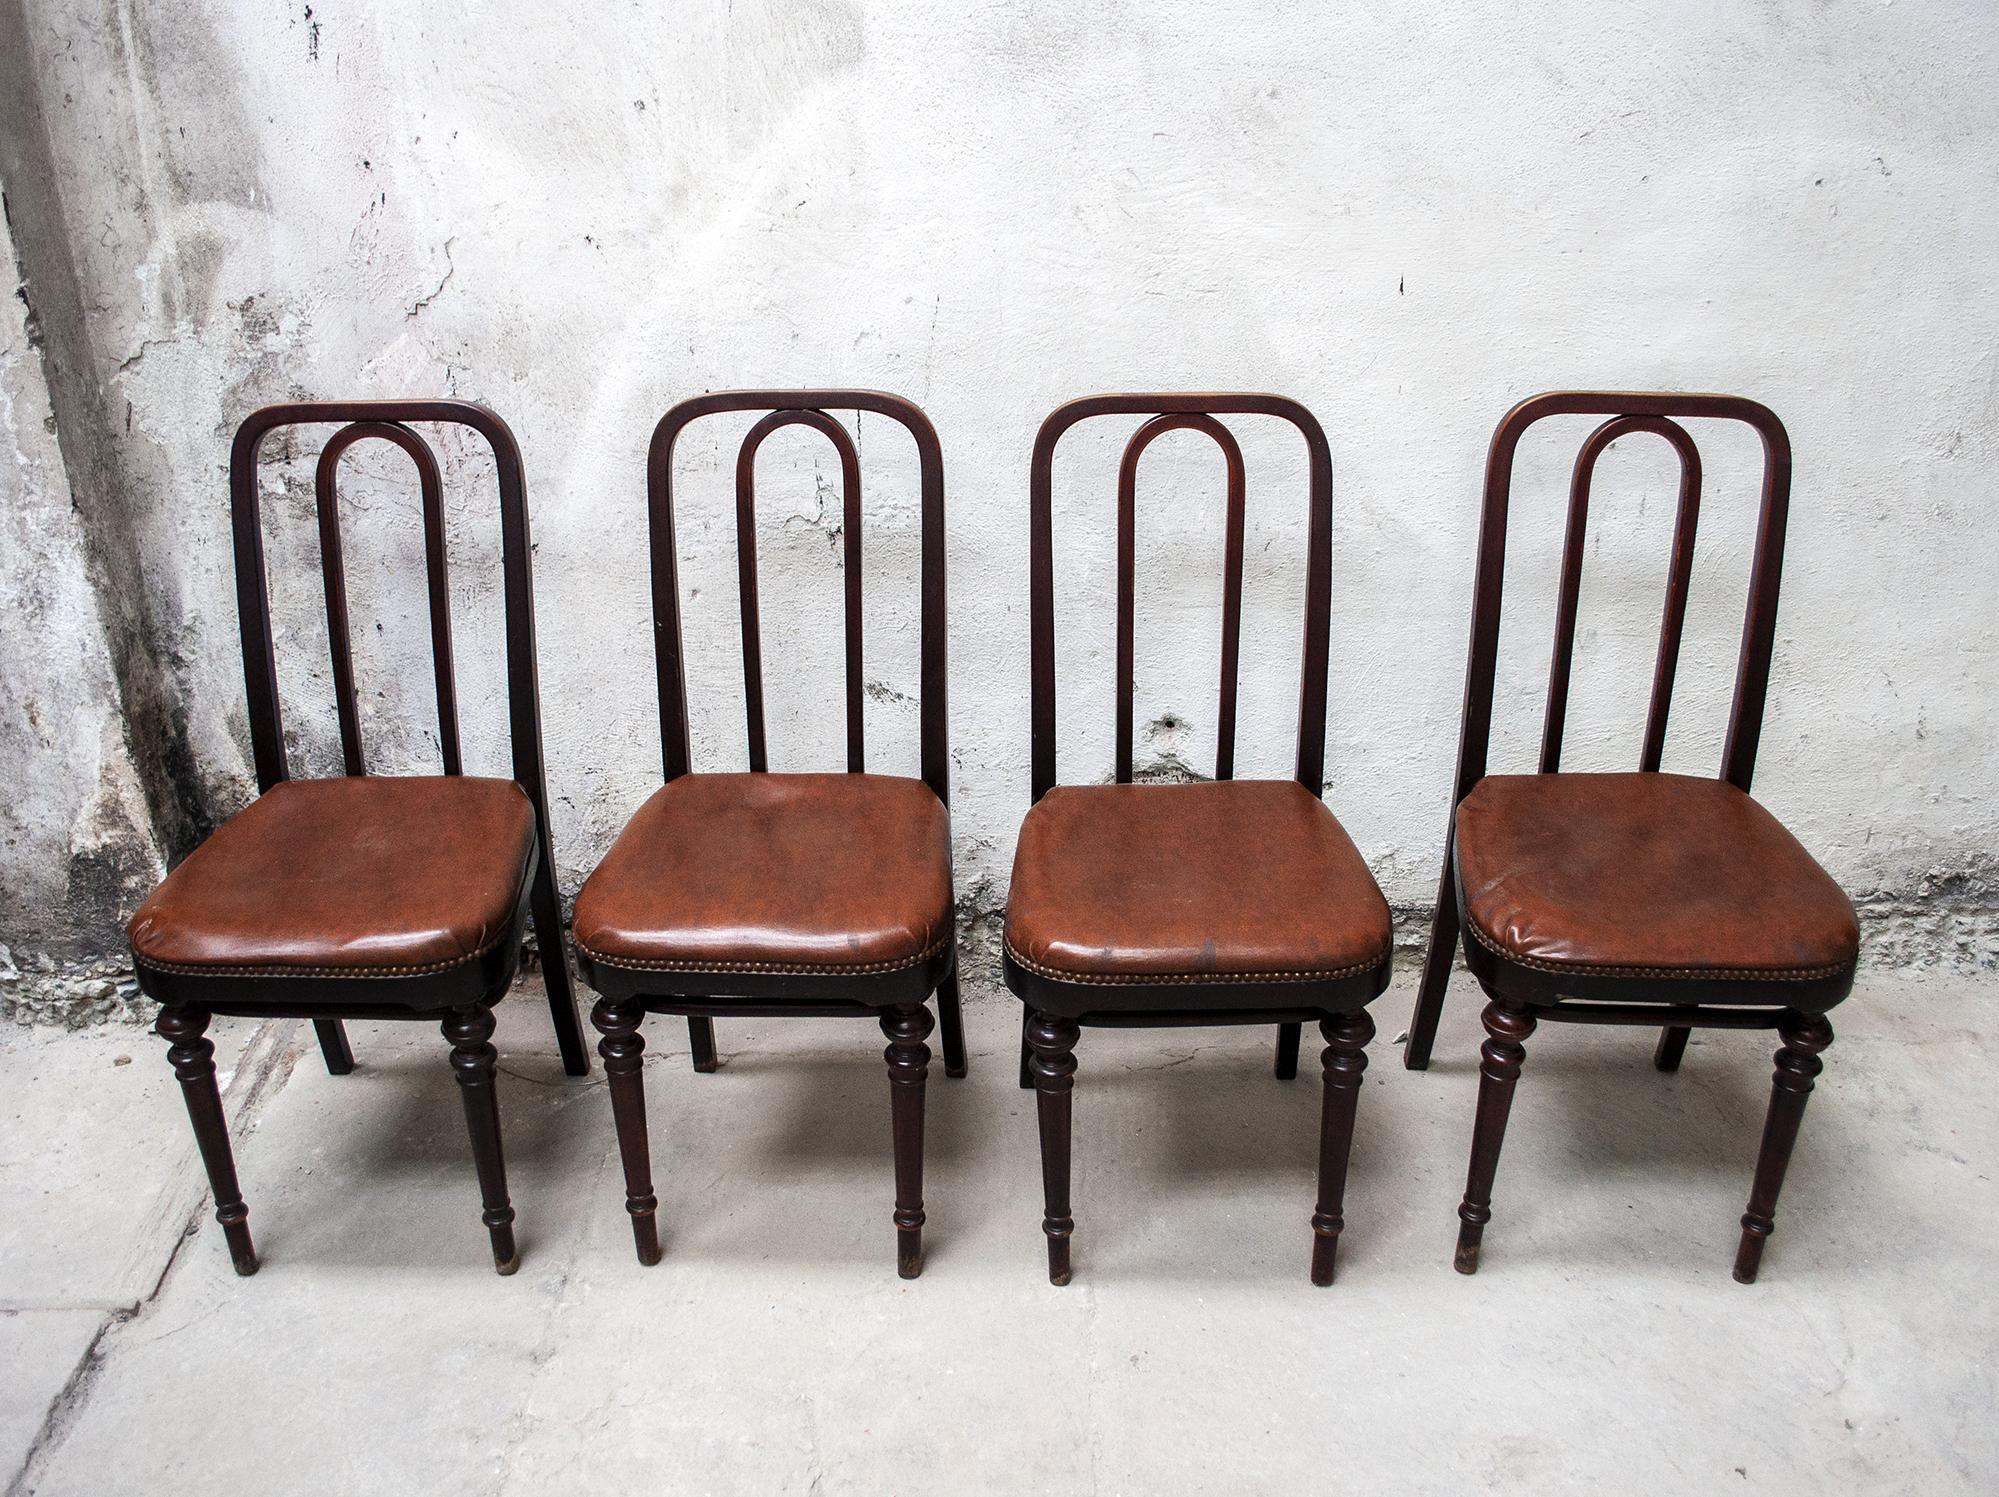 Four wooden chairs with faux leather upholstery.
To be upholstered
Production attributed to Thonet,
1910s.